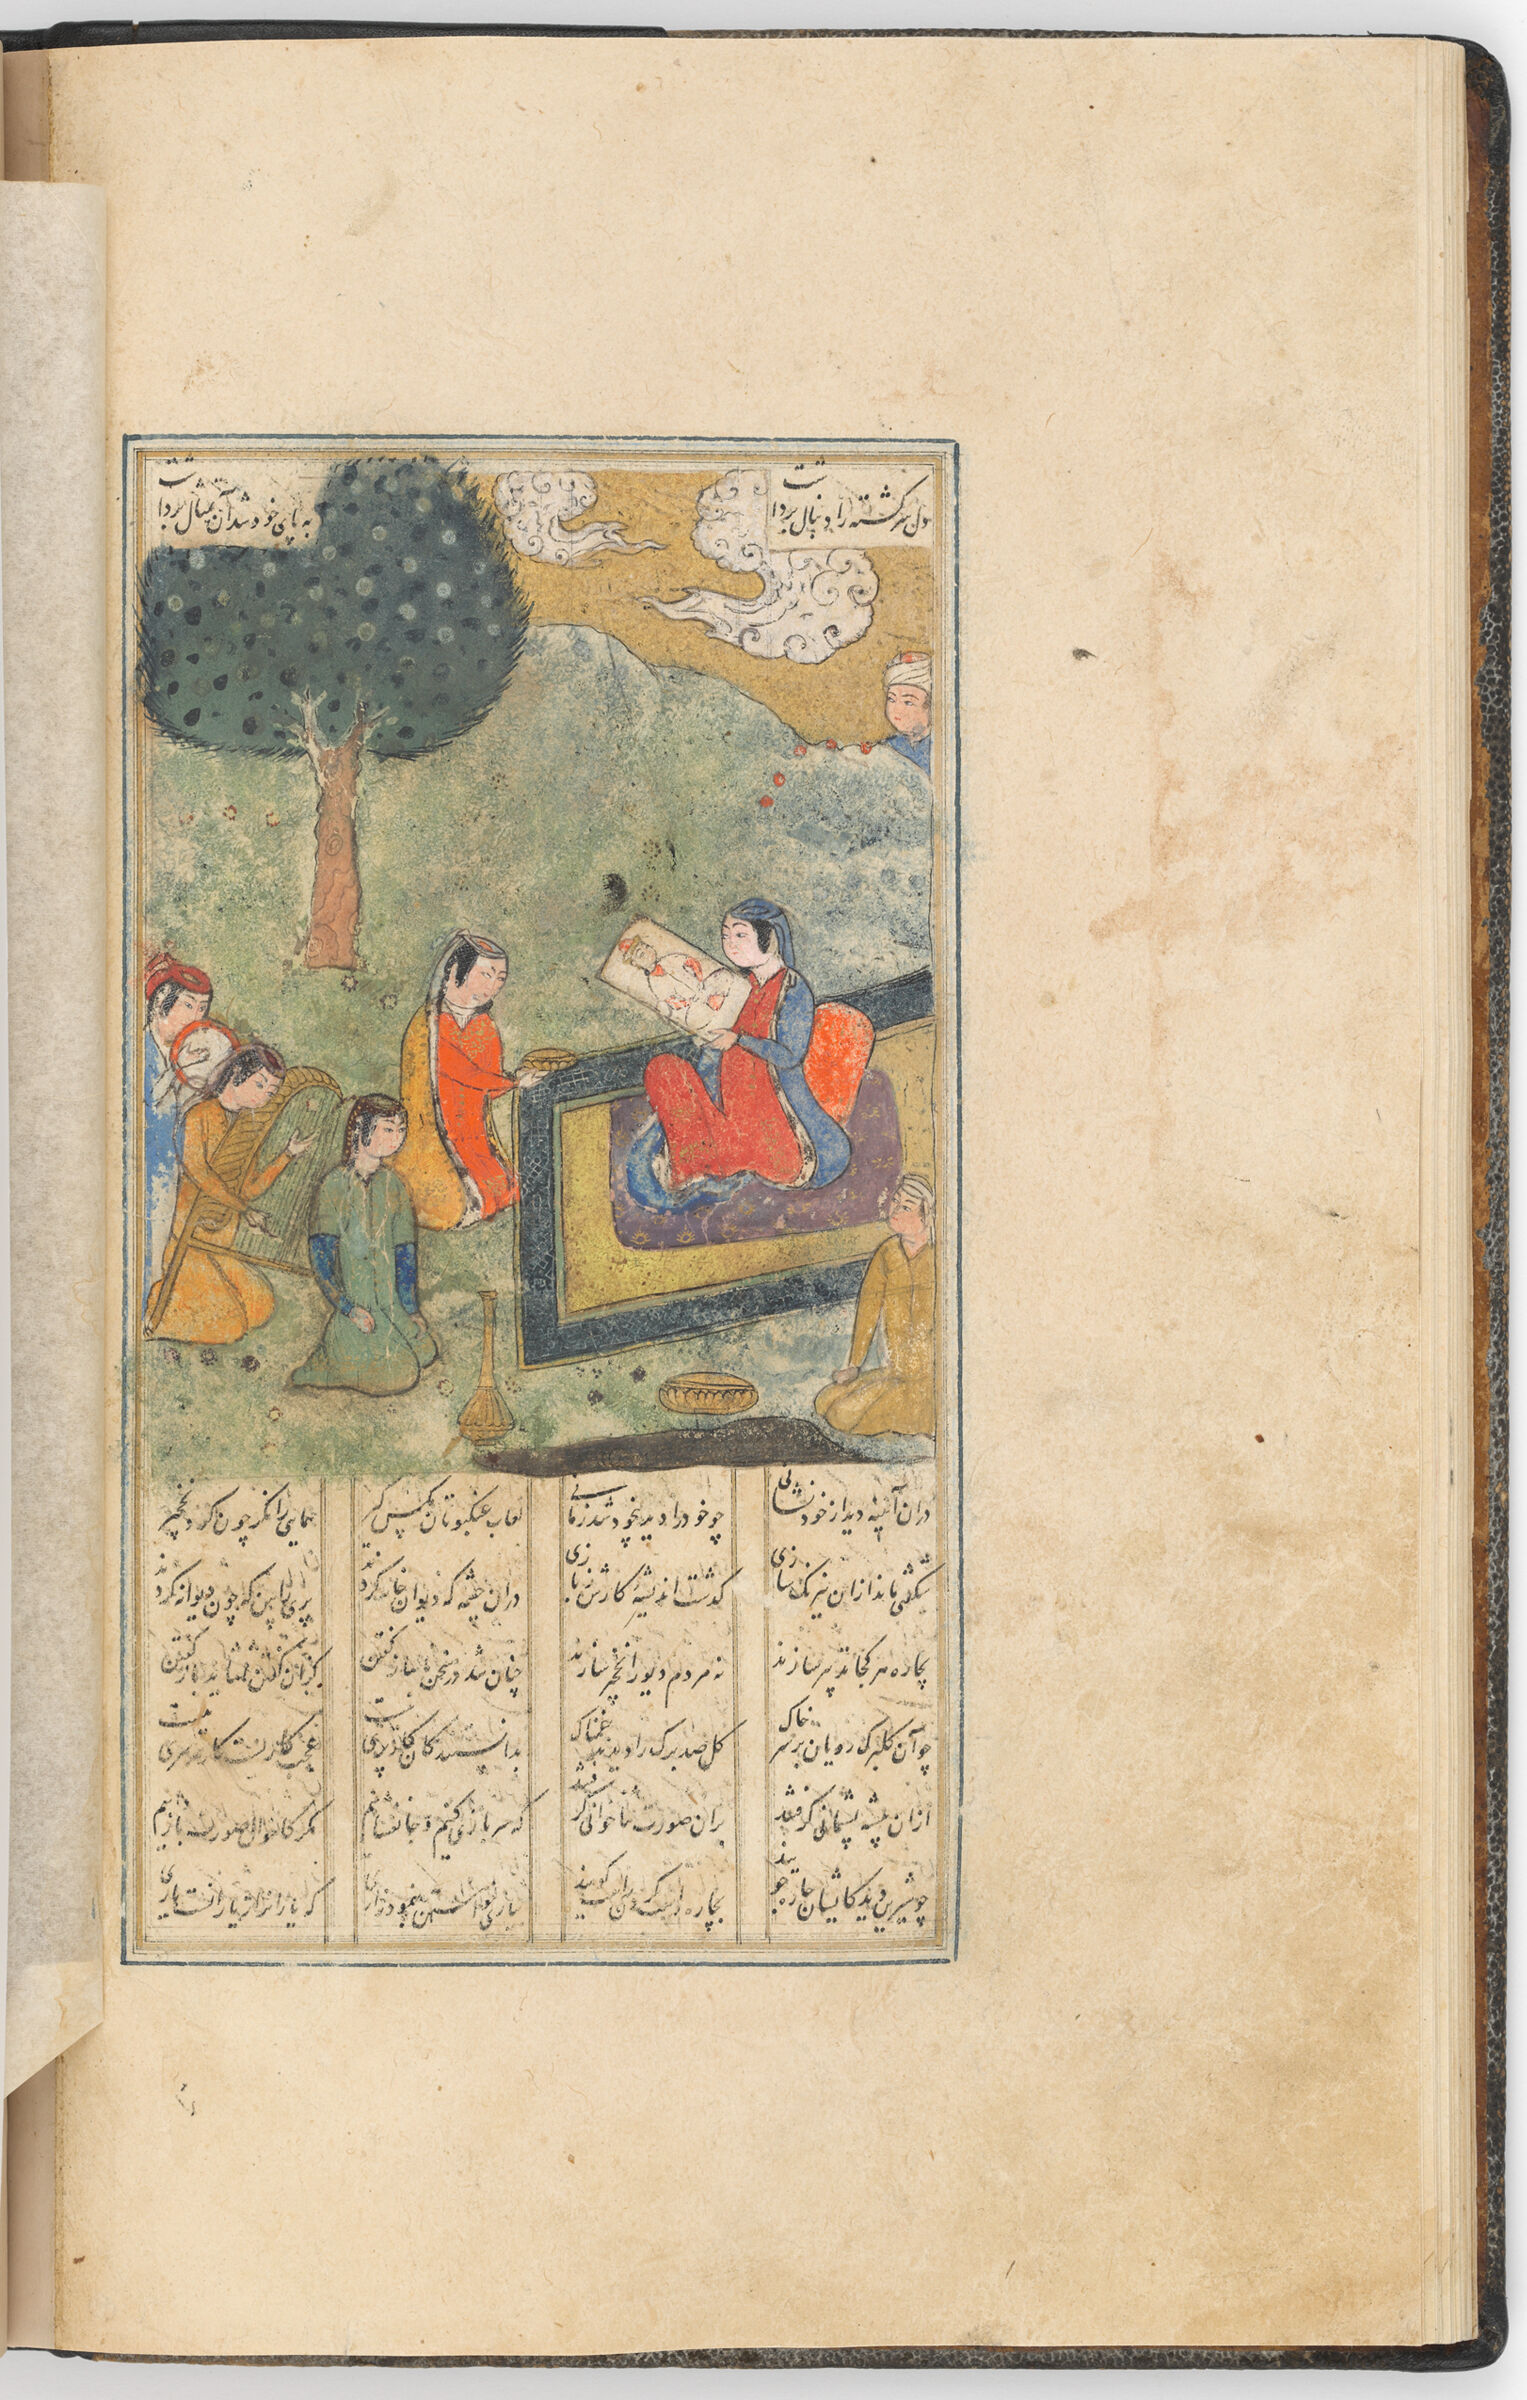 Shirin Looks At The Portrait Of Khusraw (Text Recto; Painting Verso Of Folio 46), Painting From A Manuscript Of The Khamsa By Nizam